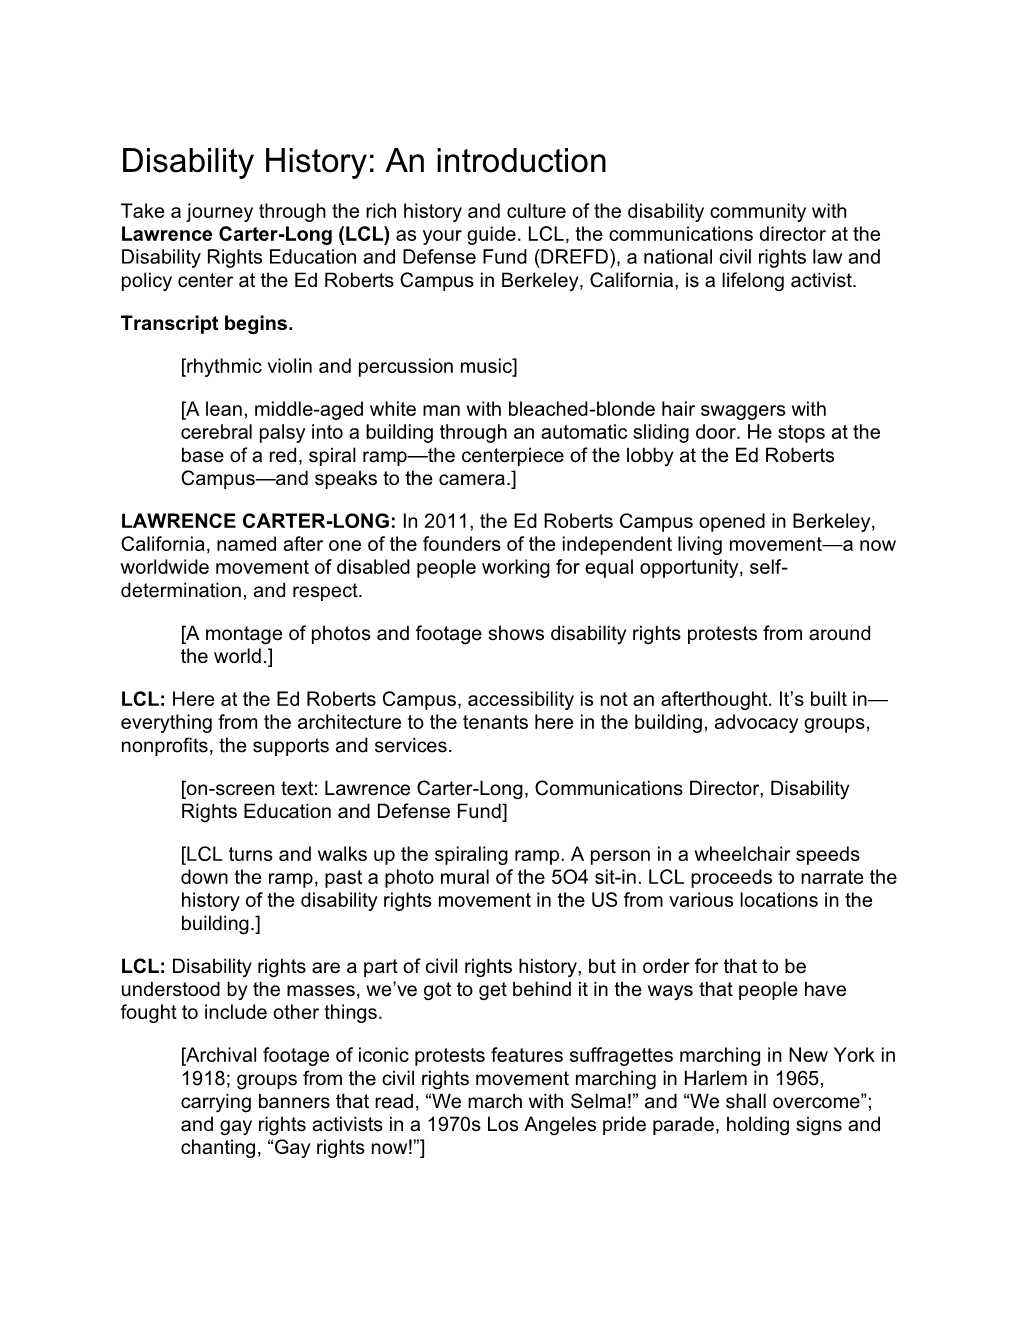 Disability History: an Introduction